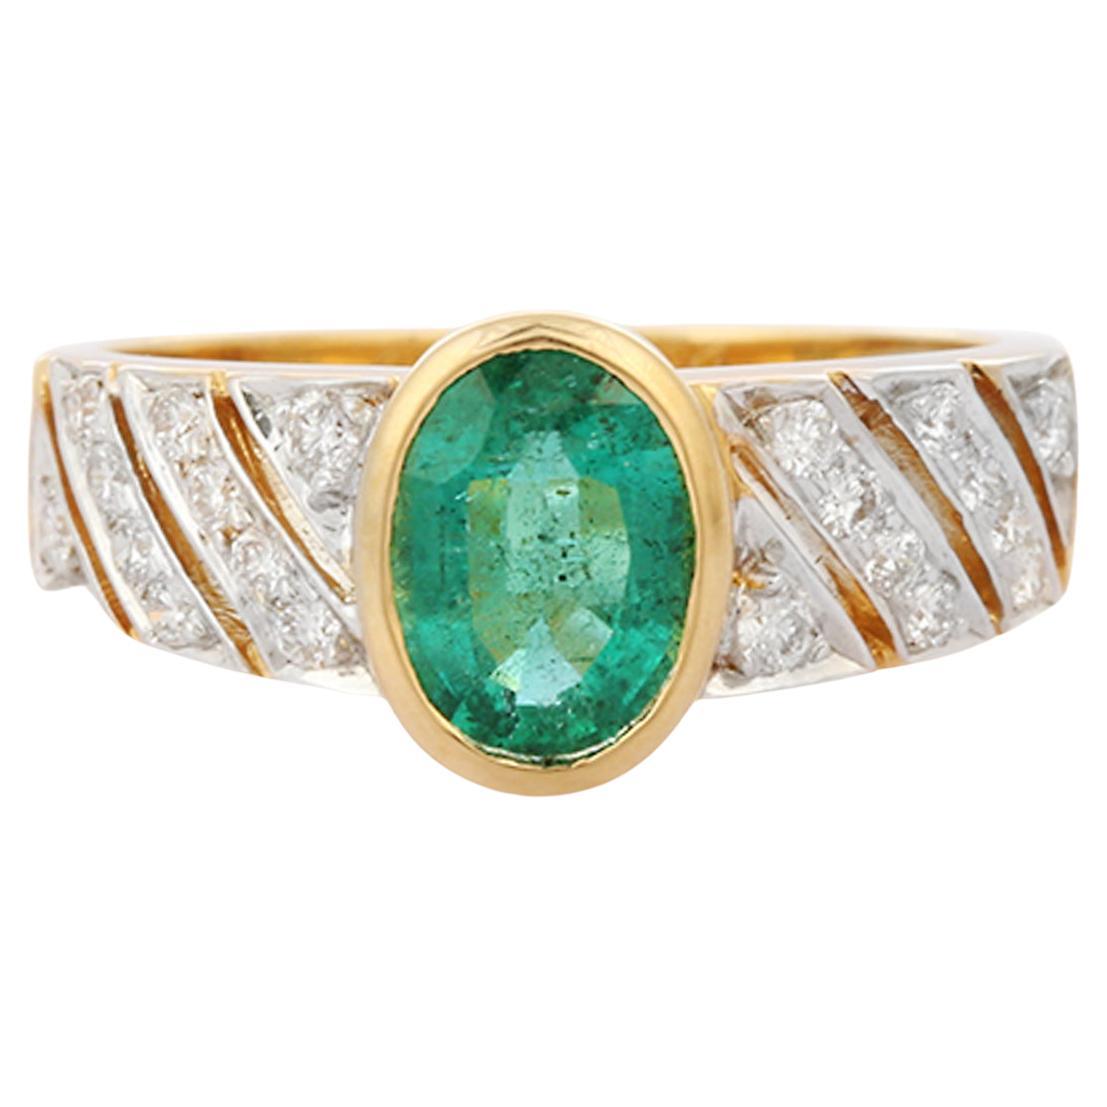 For Sale:  Exquisite 1.11 Ct Emerald Gemstone & Diamonds Engagement Ring in 18K Yellow Gold